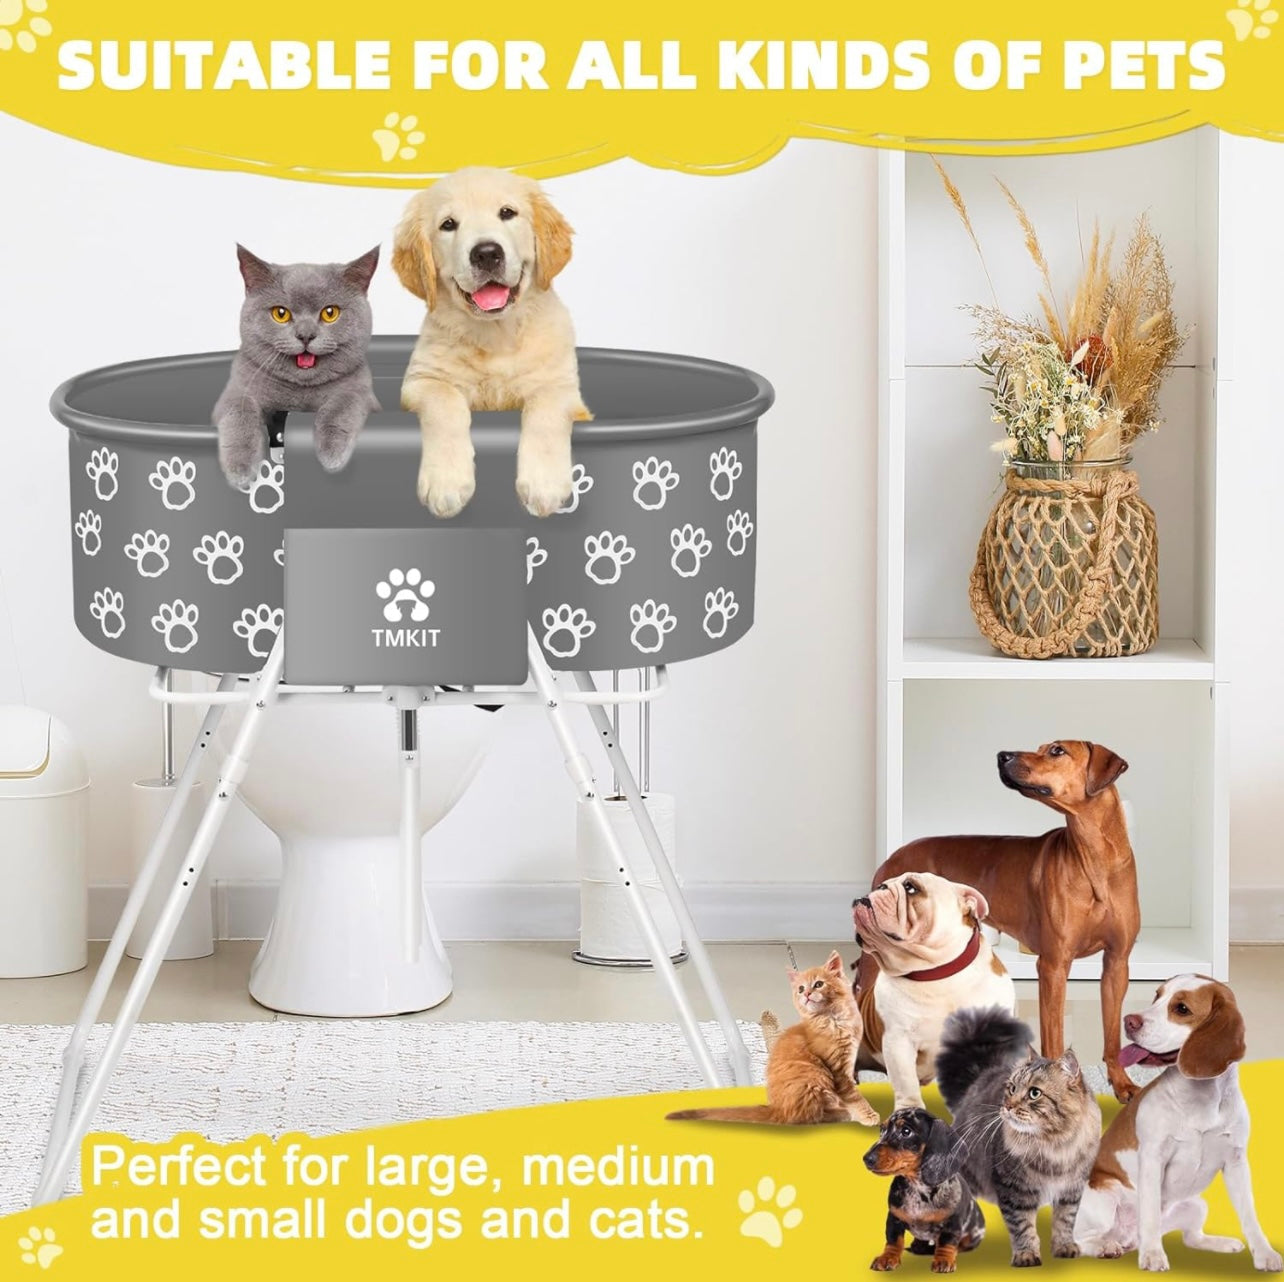 Dog Bathtub for Small Dogs, Elevated Professional Dog Bath Tub for Pet Bathing Shower and Grooming, Portable Foldable with Safety Lock Pets Washing Station for Small, Medium, Large Pet Dog Cats